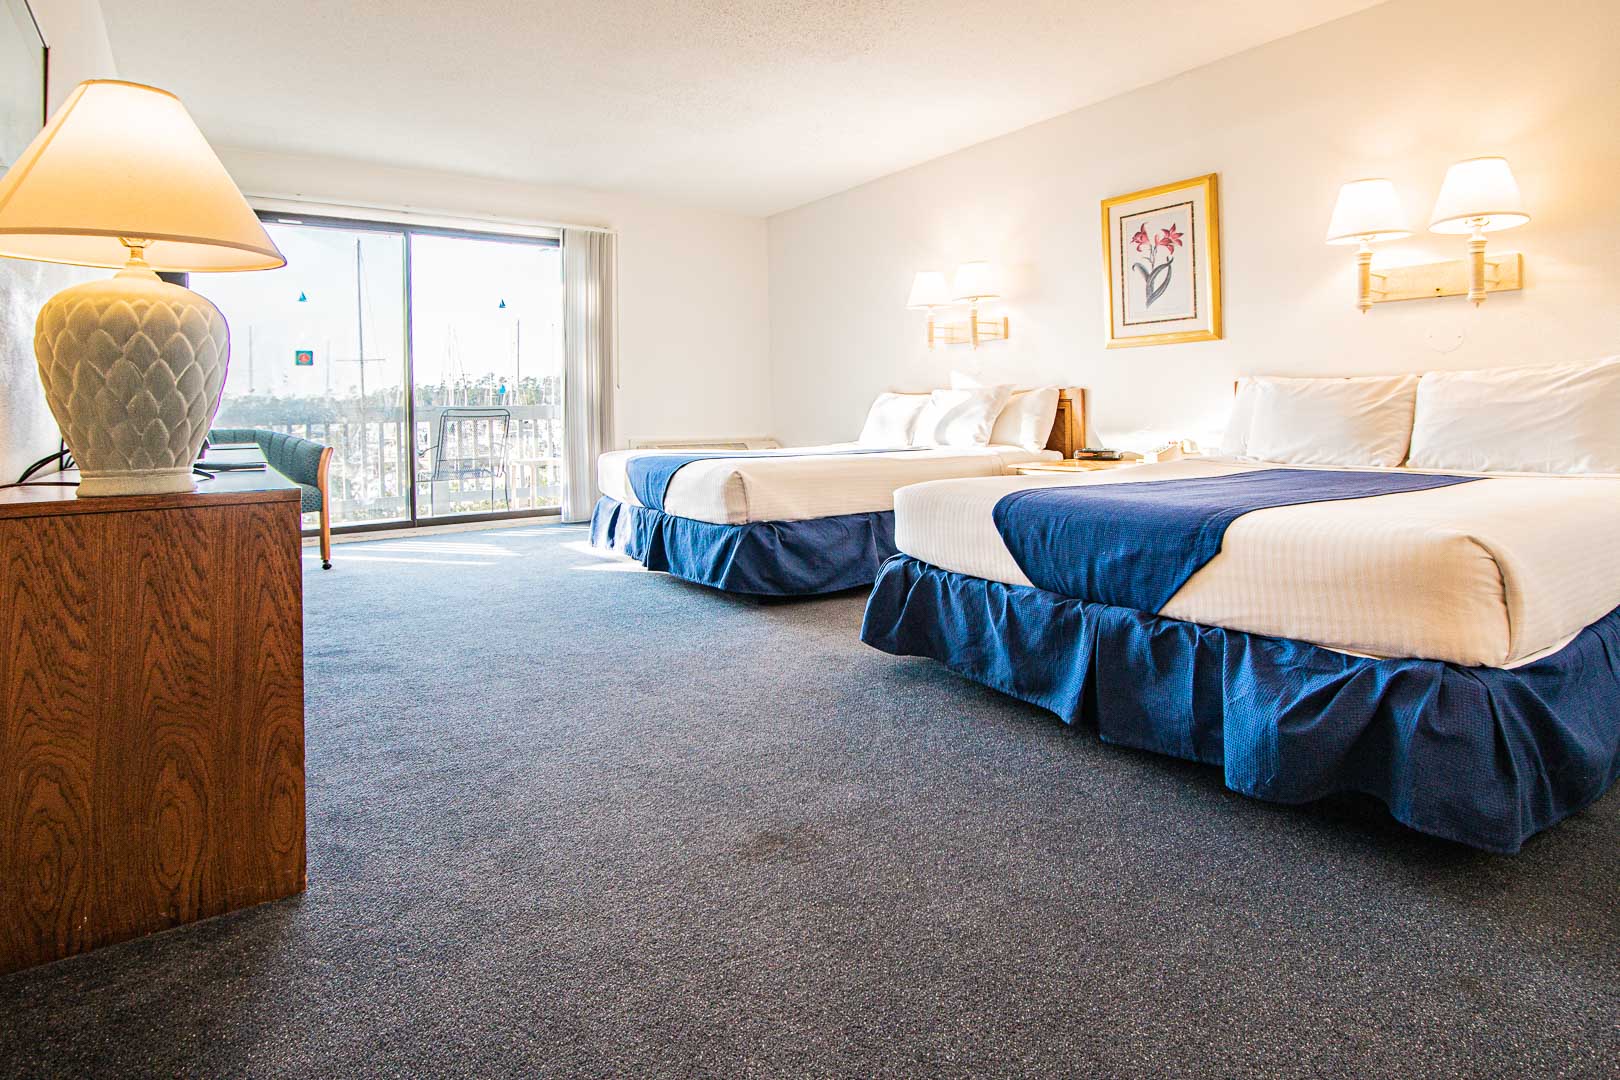 A spacious bedroom with double beds at VRI's Harbourside II in New Bern, North Carolina.